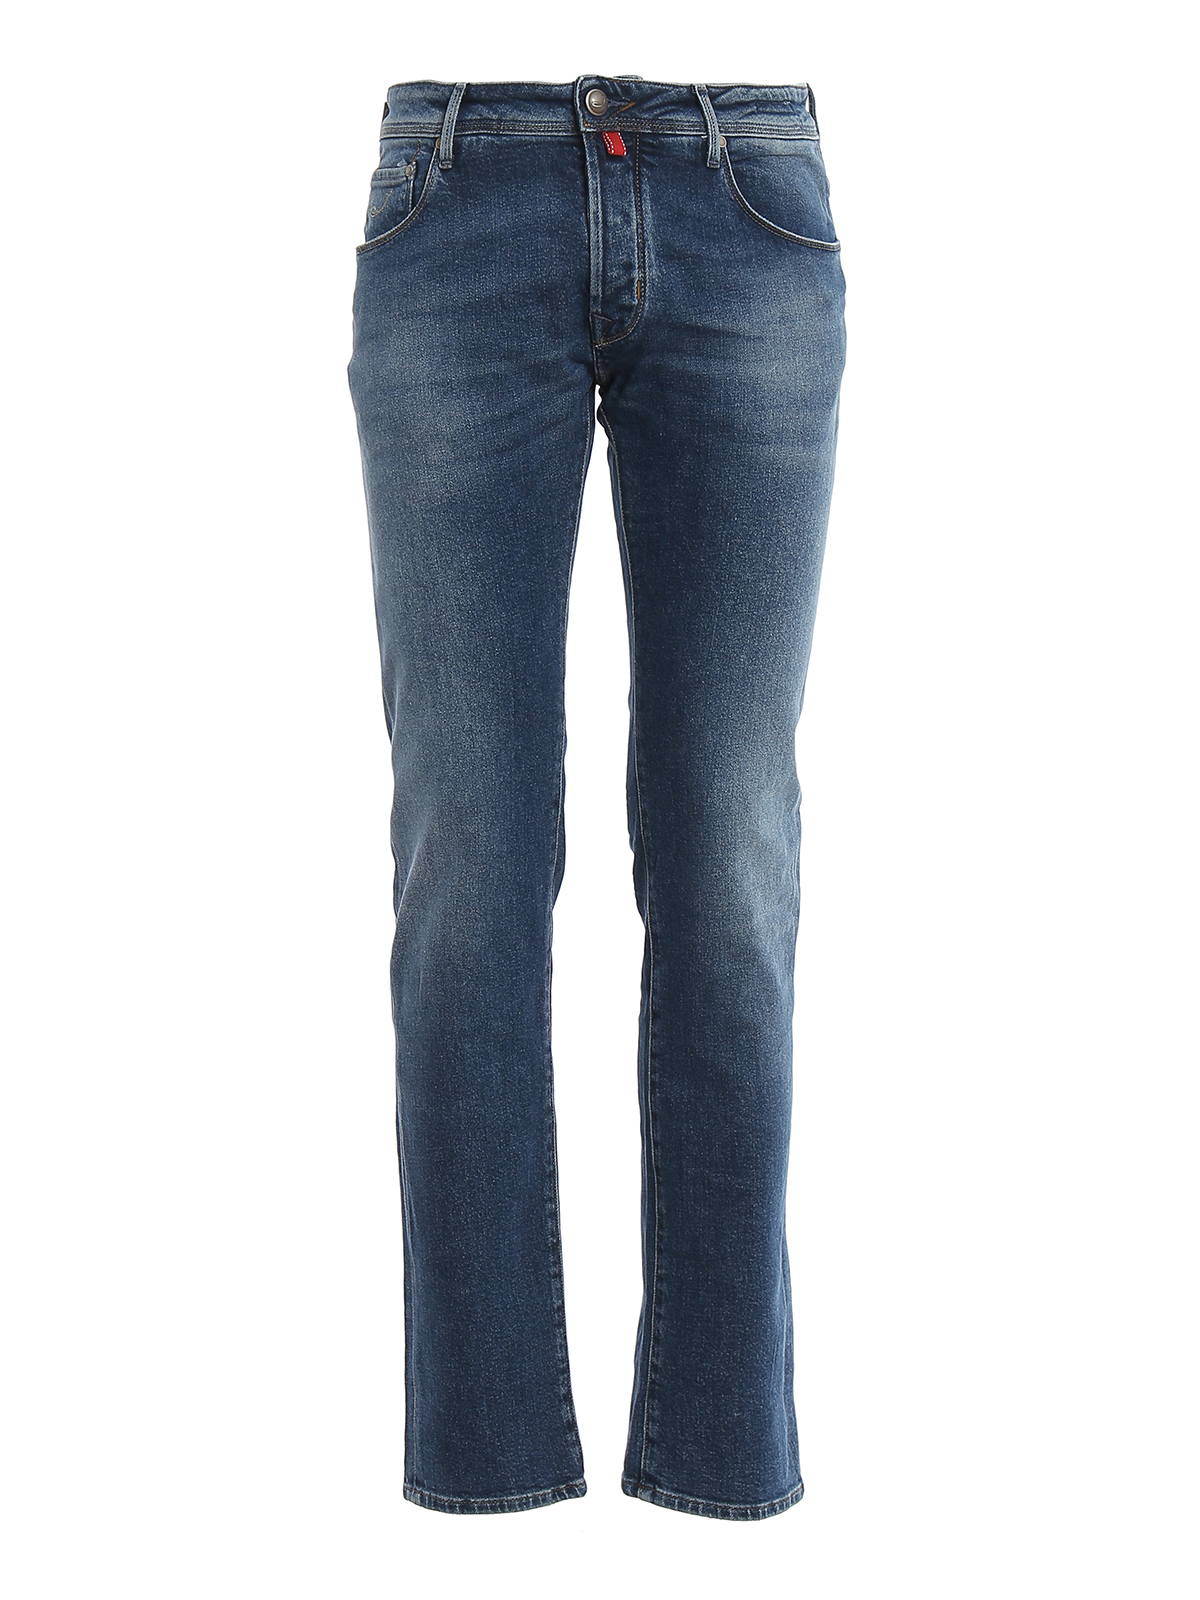 Jacob Cohen Style 622 Faded Jeans In Medium Wash | ModeSens